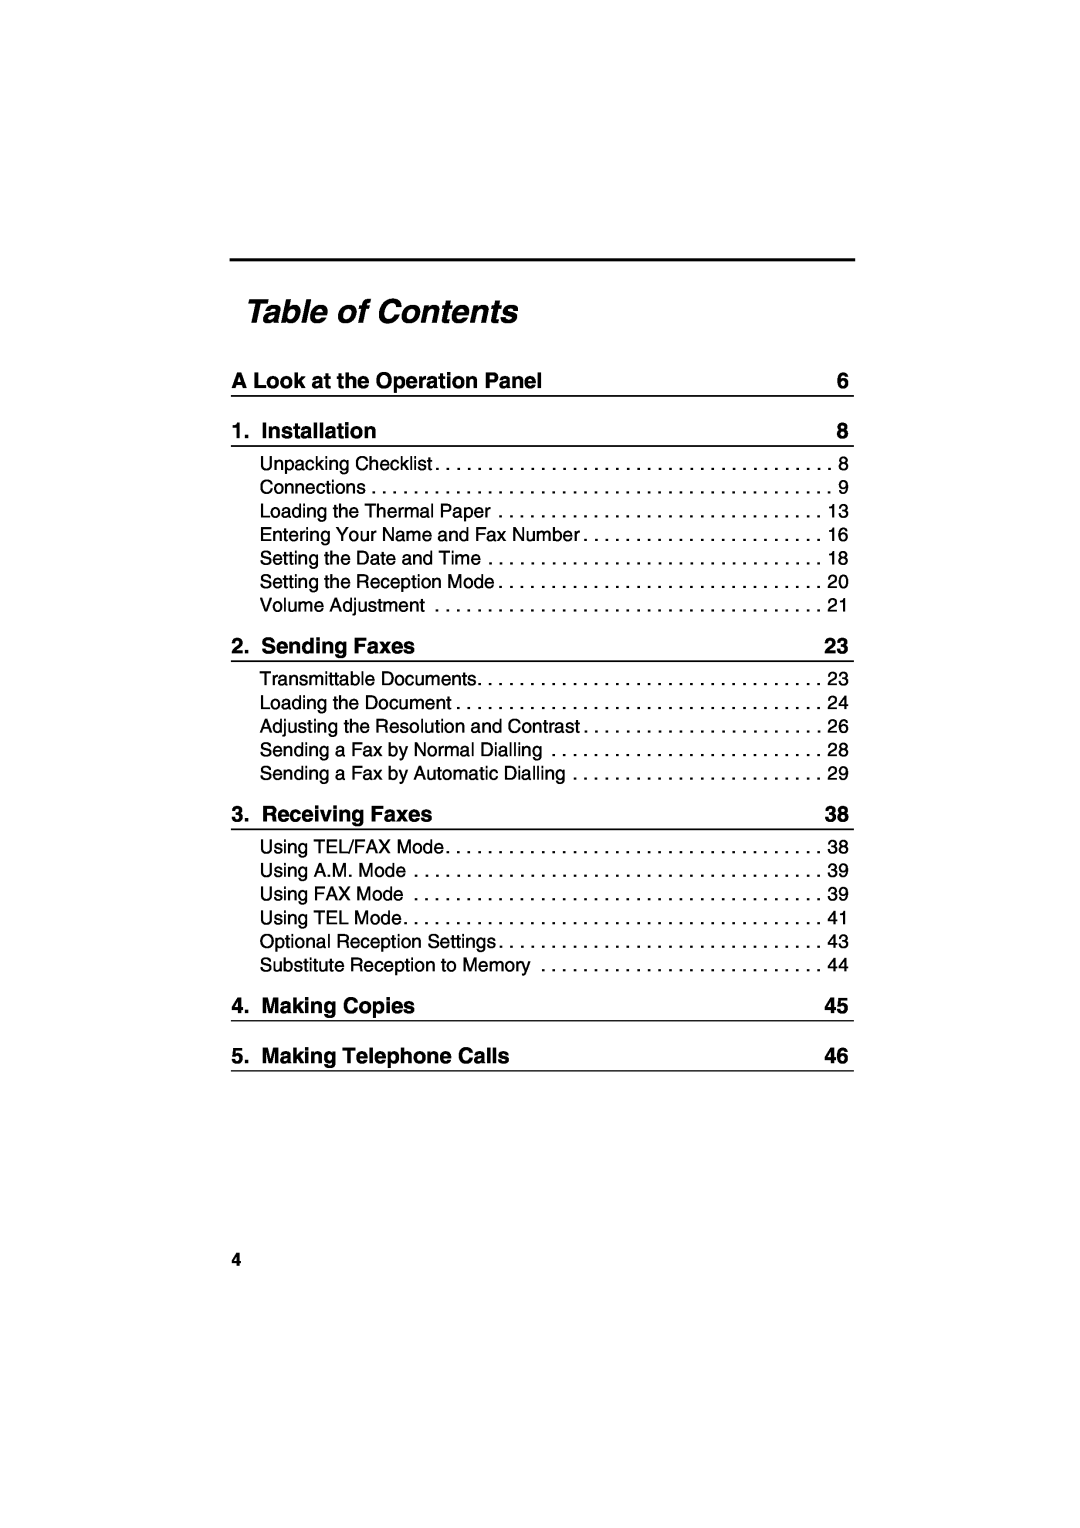 Sharp FO-51 Table of Contents, A Look at the Operation Panel, Installation, Sending Faxes, Receiving Faxes, Making Copies 